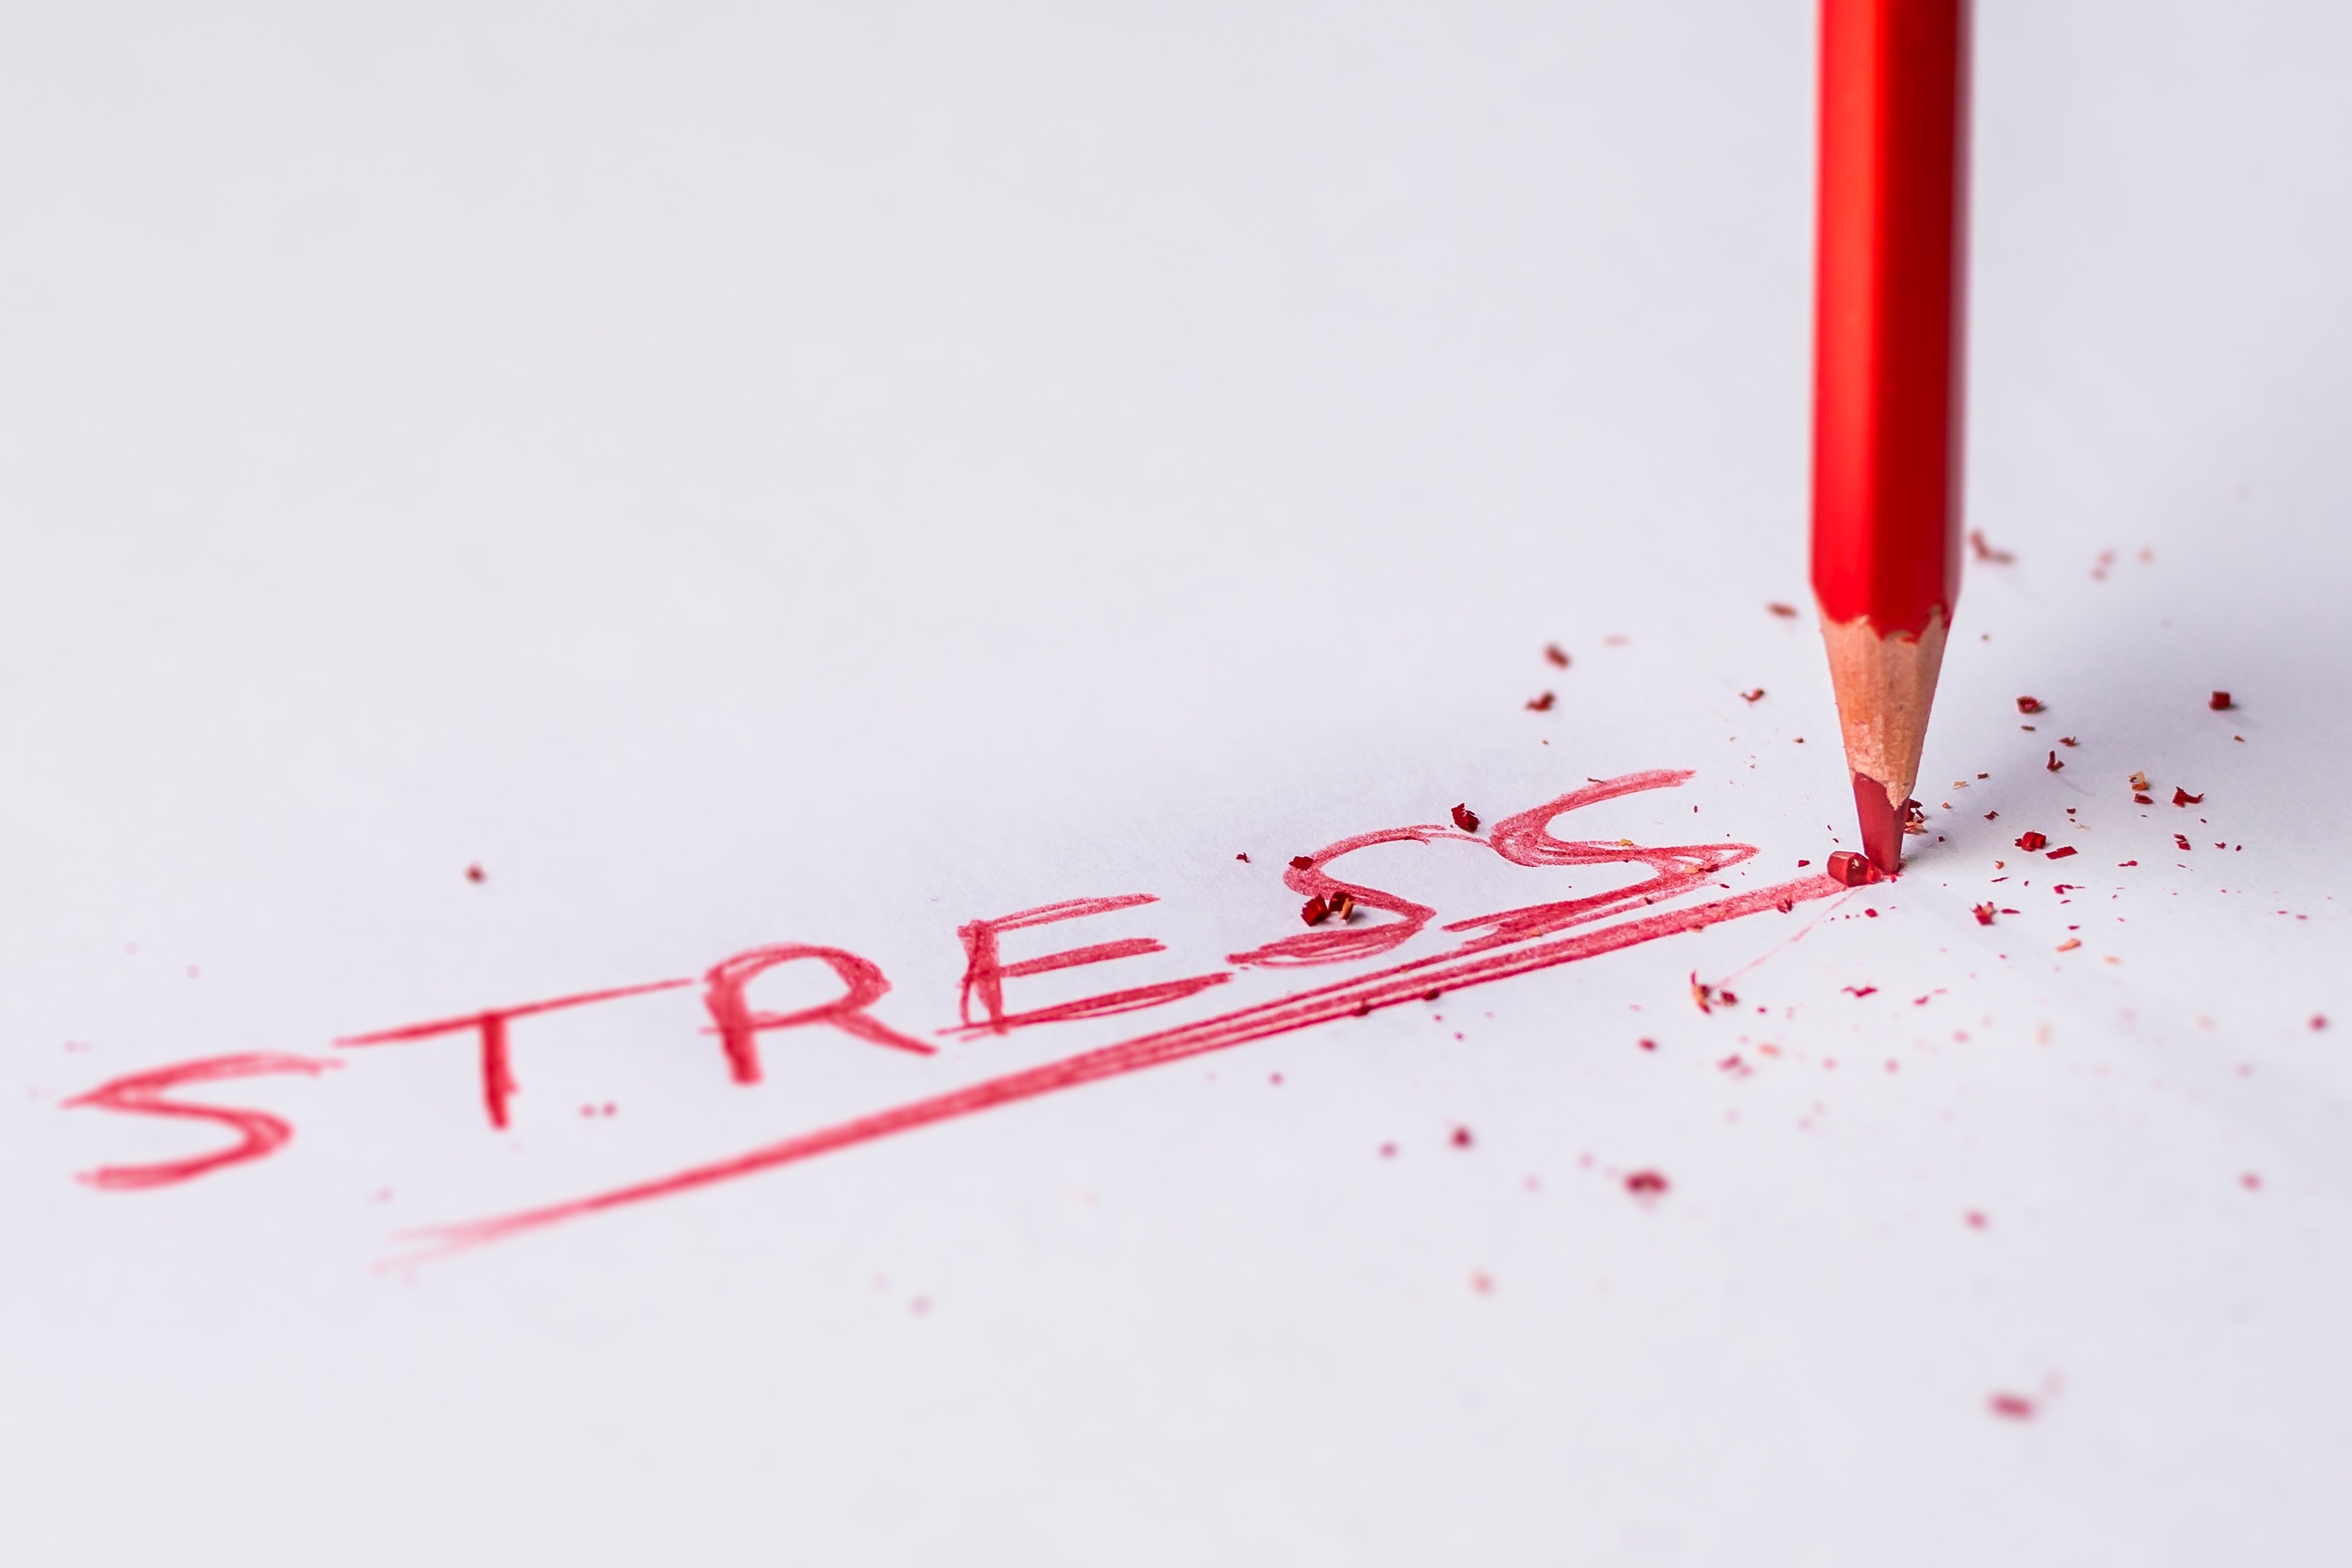 Image of a red pencil writing on a white sheet the word STRESS